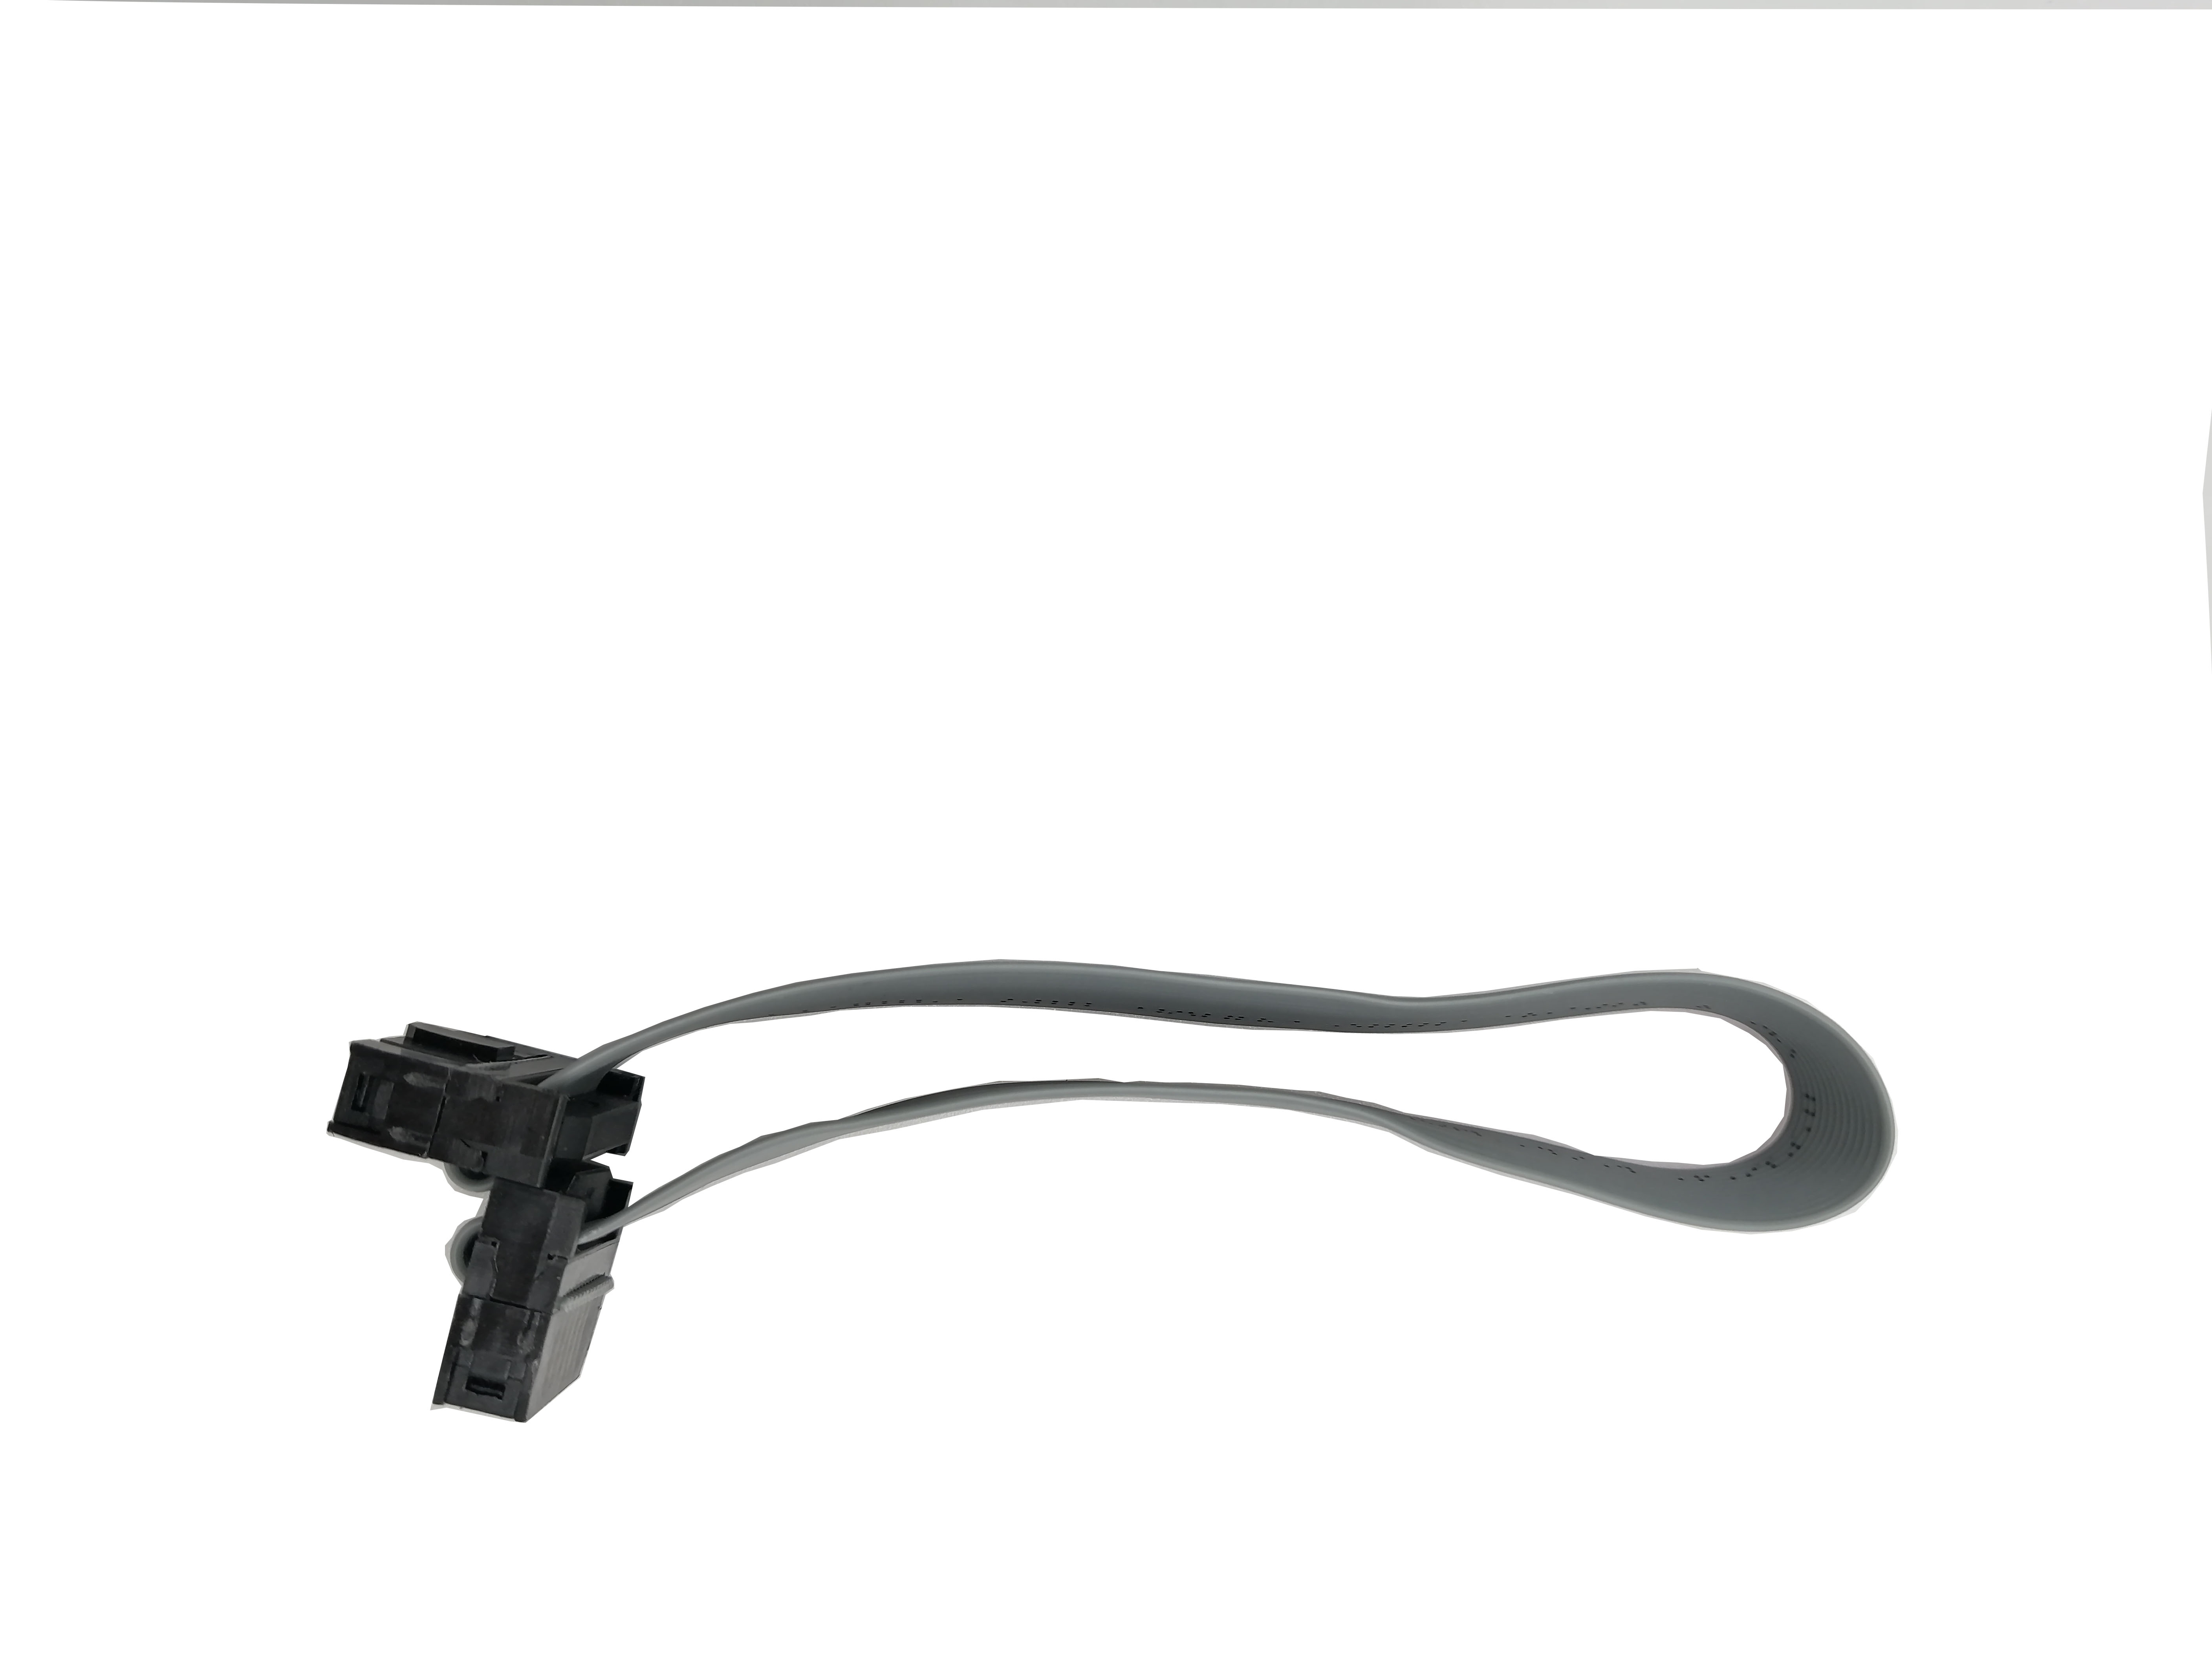 Renesas PG-FP5 PG-FP6 14-pin user-system interface cable